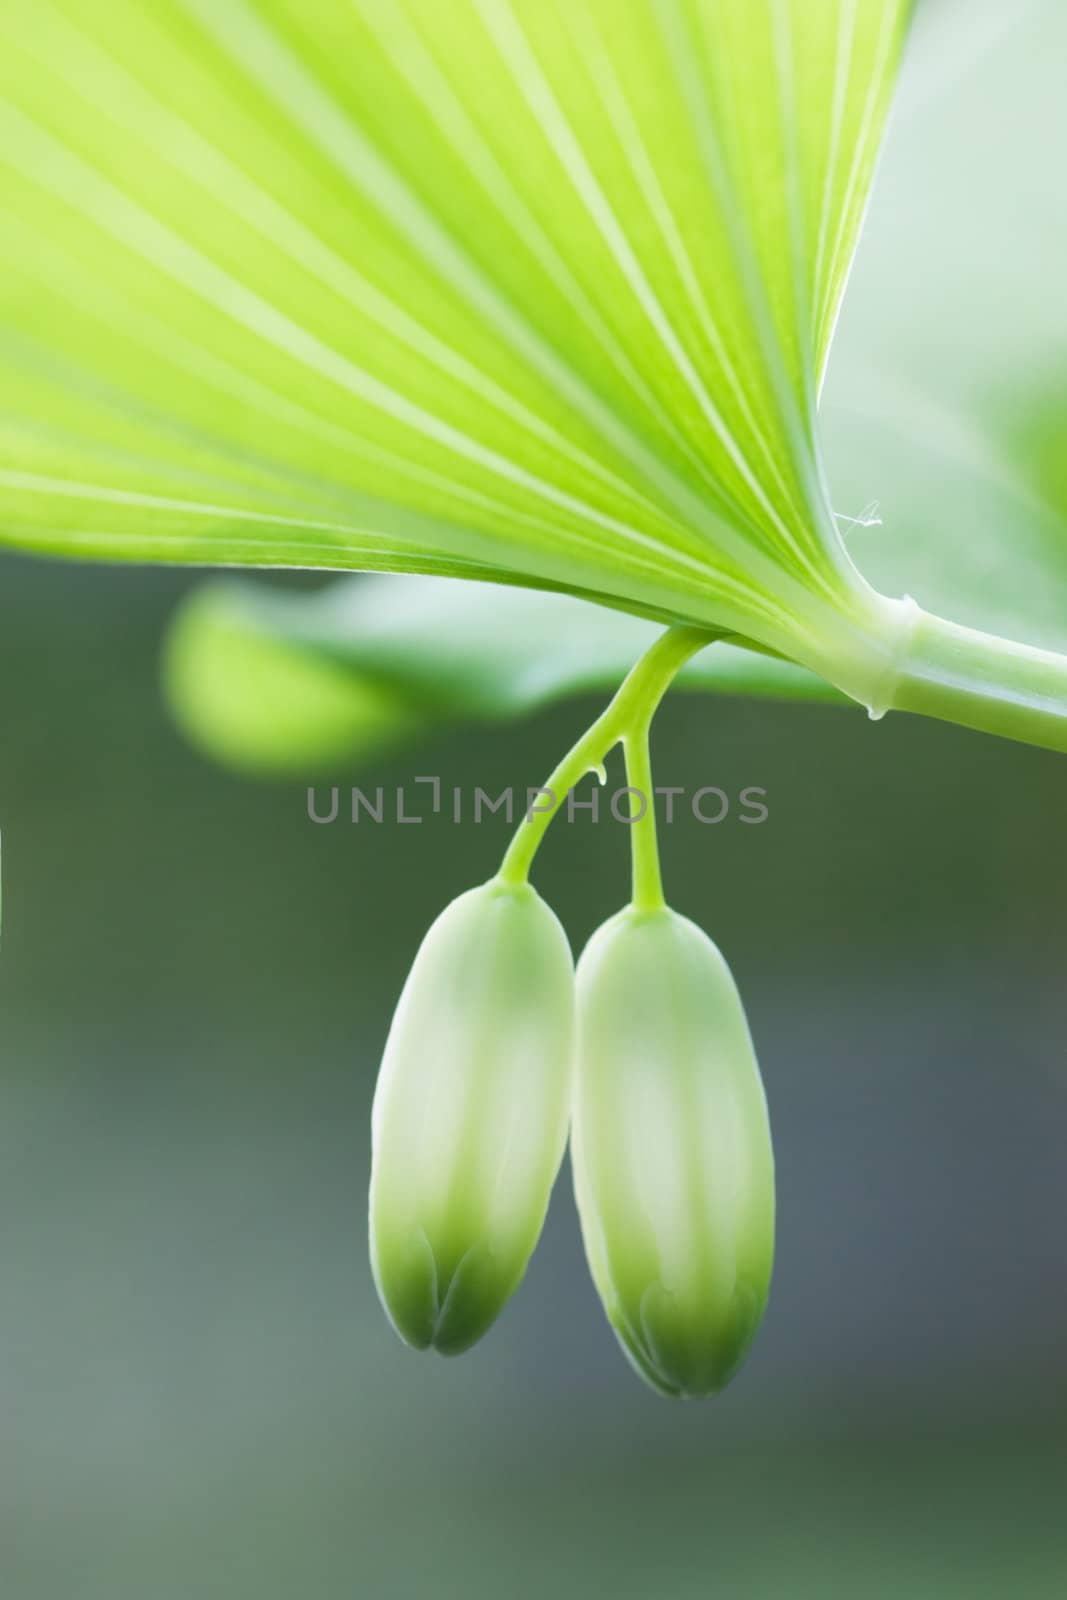 Close-up of green closed bud. Shallow depth of field.